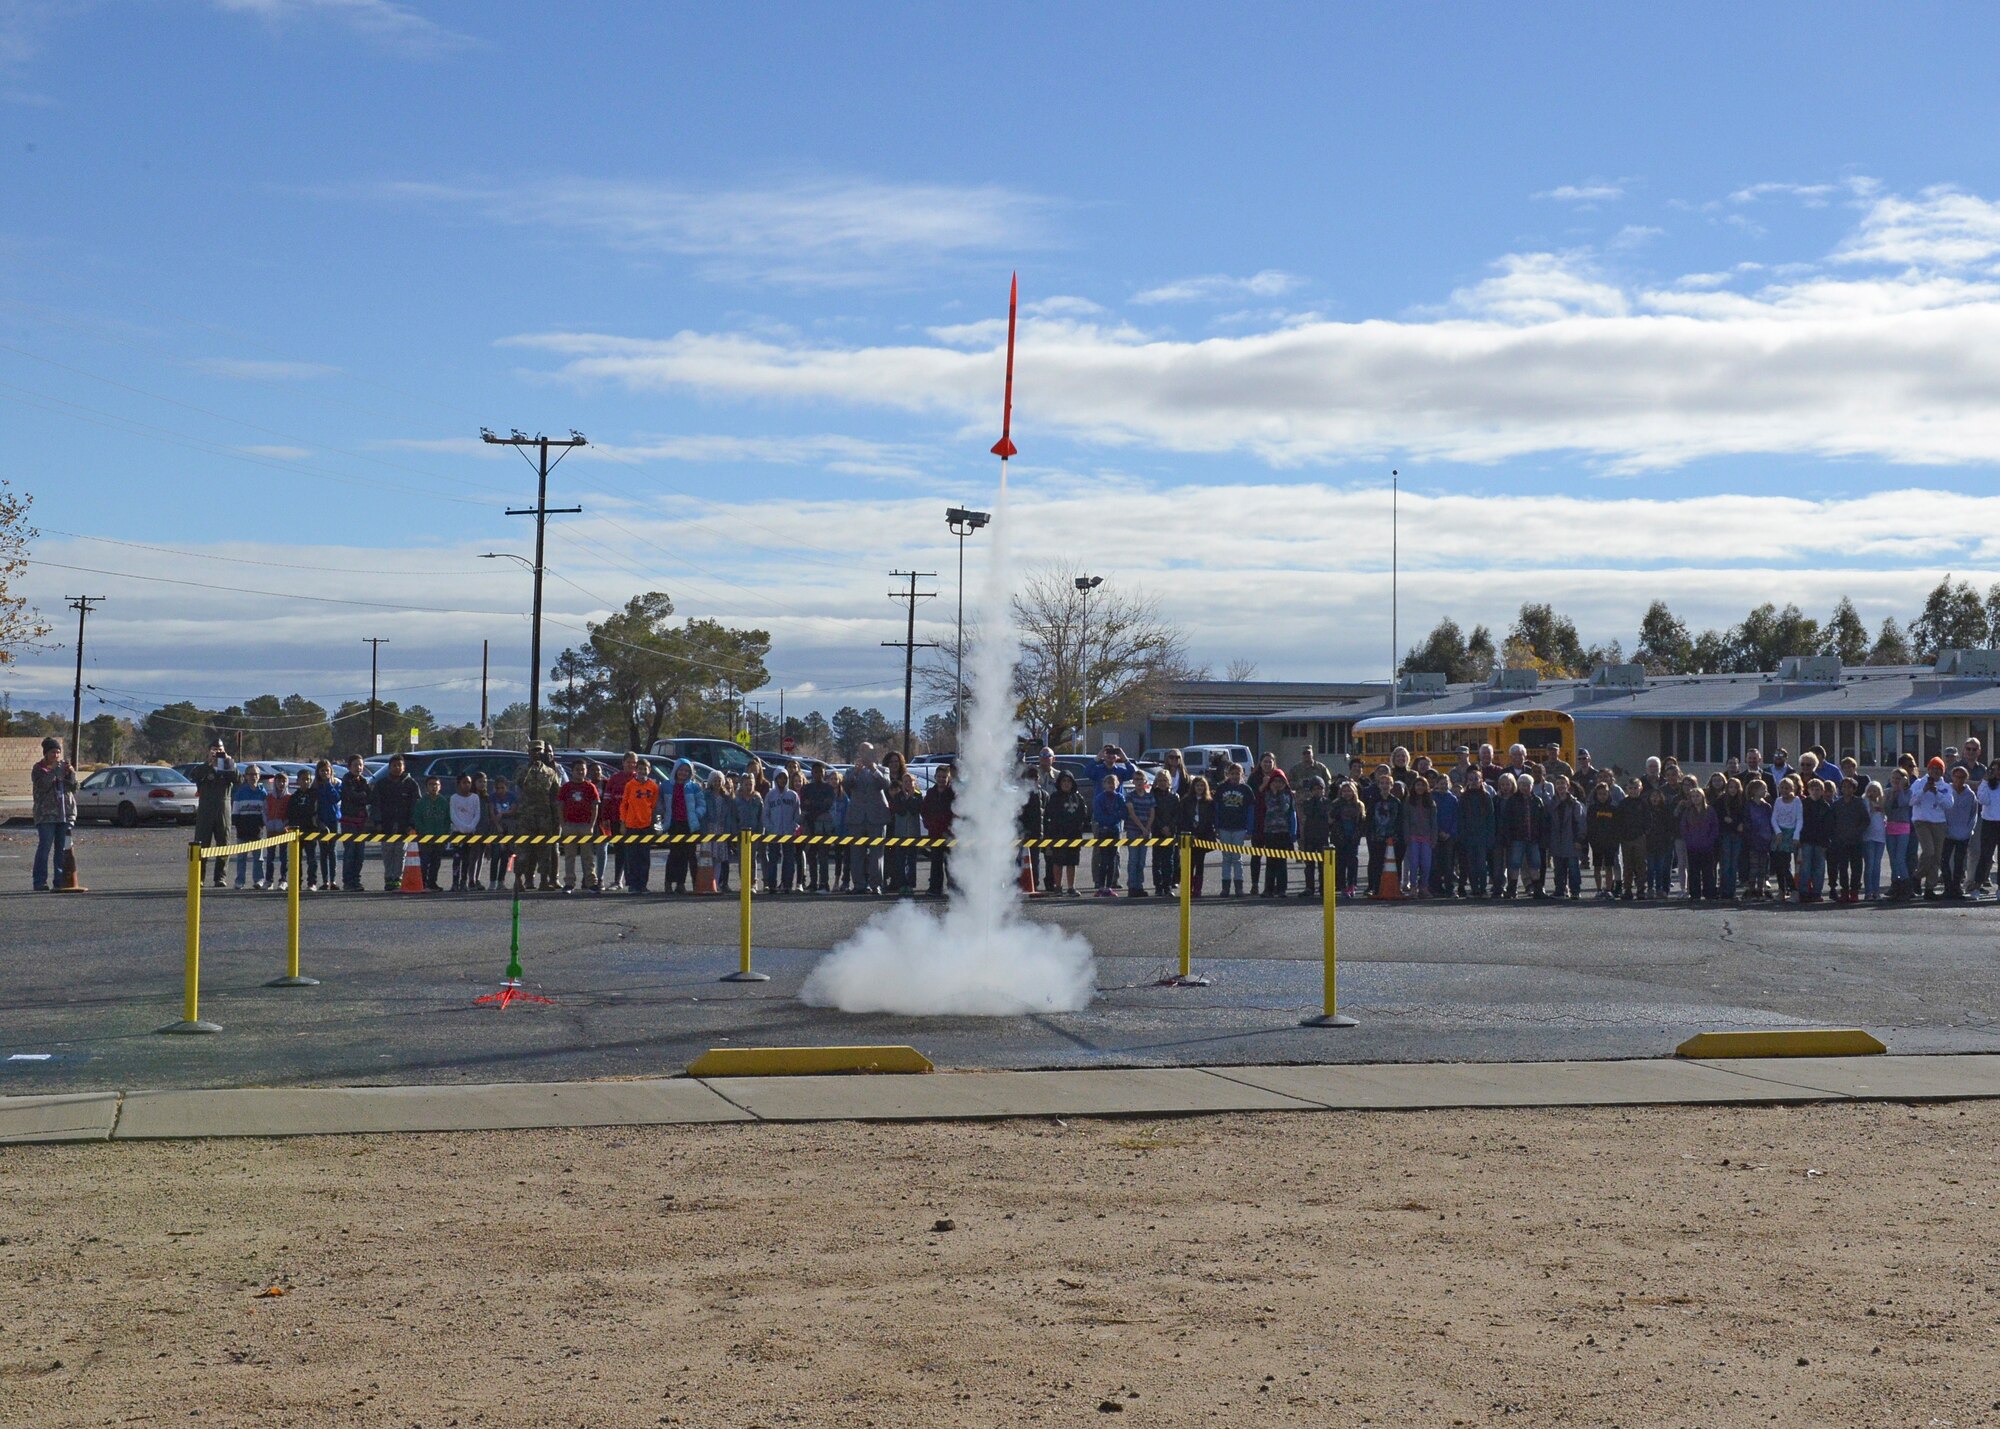 Students and guests at Branch Elementary on Edwards Air Force Base, California, watch a rocket take off as part of the grand opening of the base’s new STARBASE school program Dec. 7. The program is aimed at giving students a hands-on learning experience in the science, technology, engineering and mathematics fields. (U.S. Air Force photo by Kenji Thuloweit)